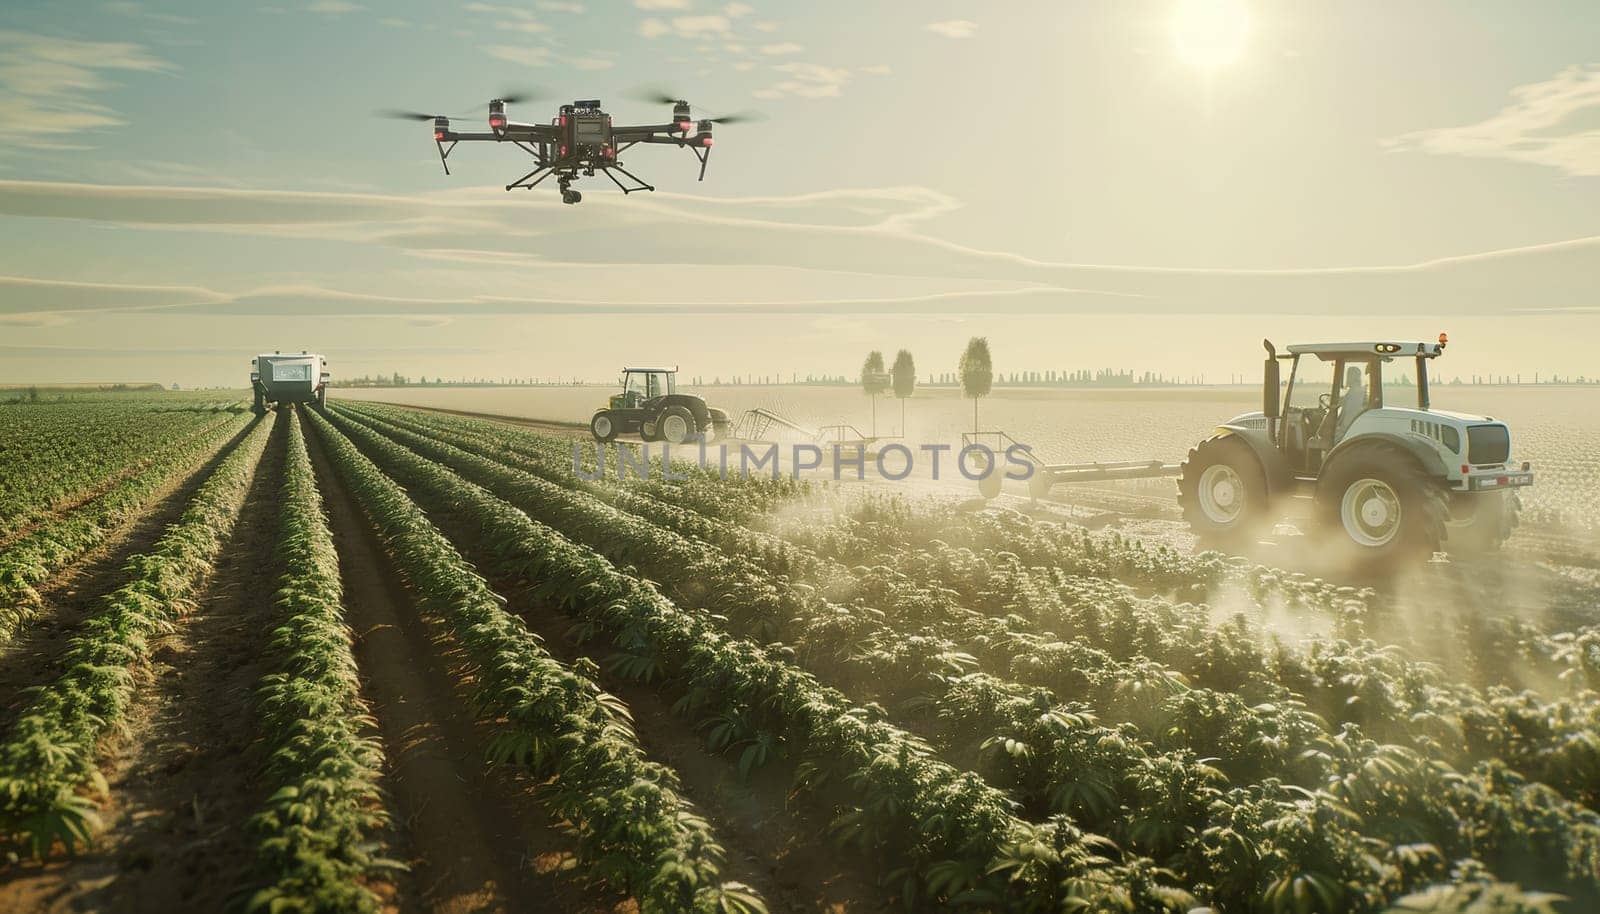 A drone is flying over a field of crops. The drone is above a tractor and a truck